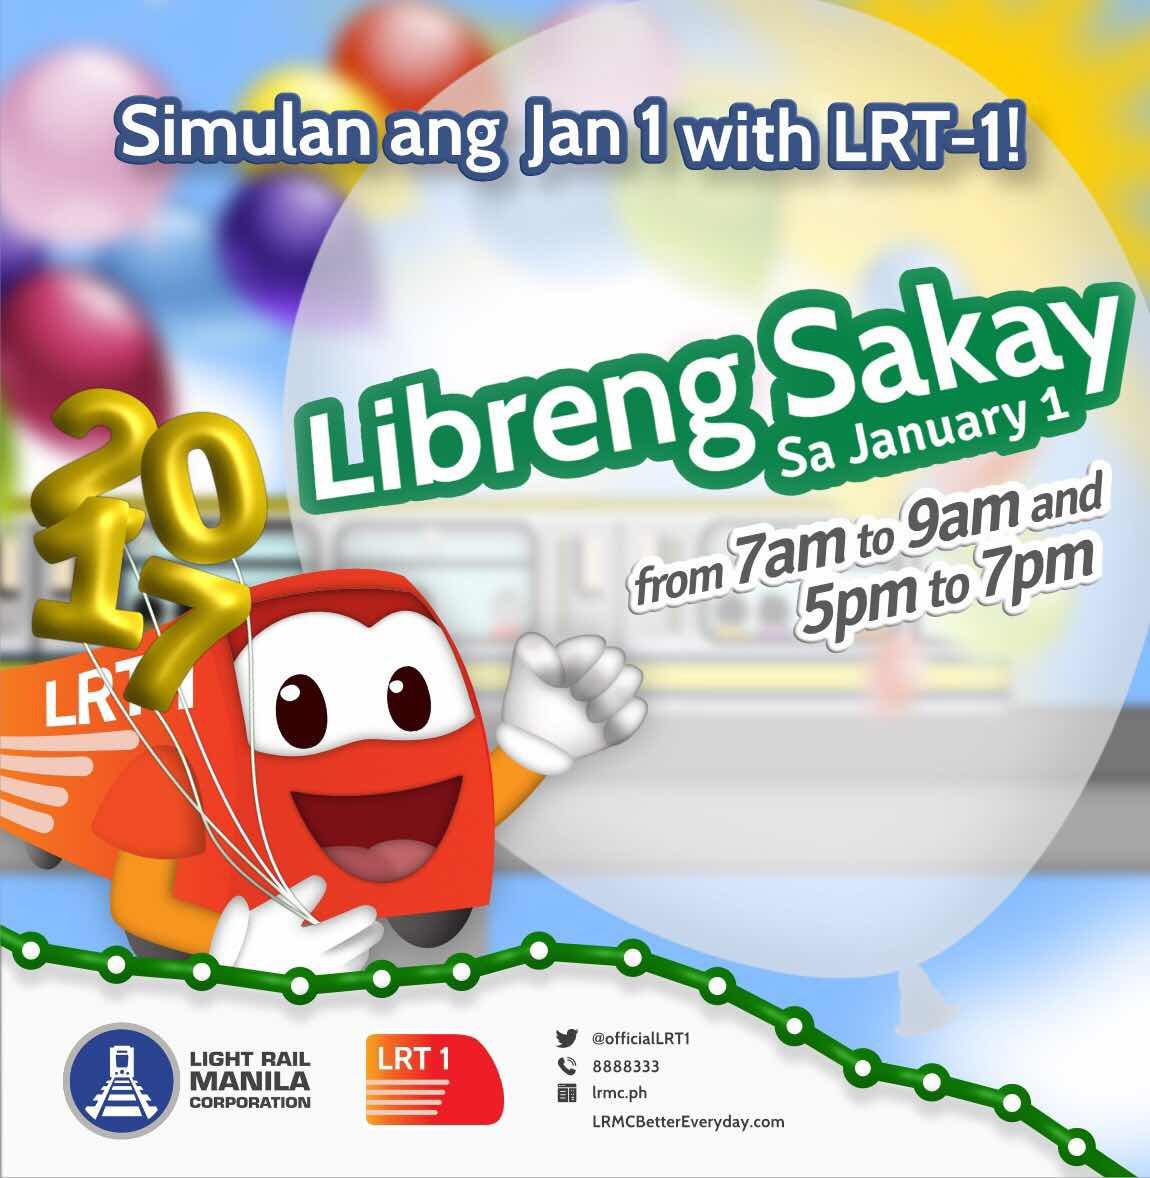 LRT-1 offers free rides on New Year’s day